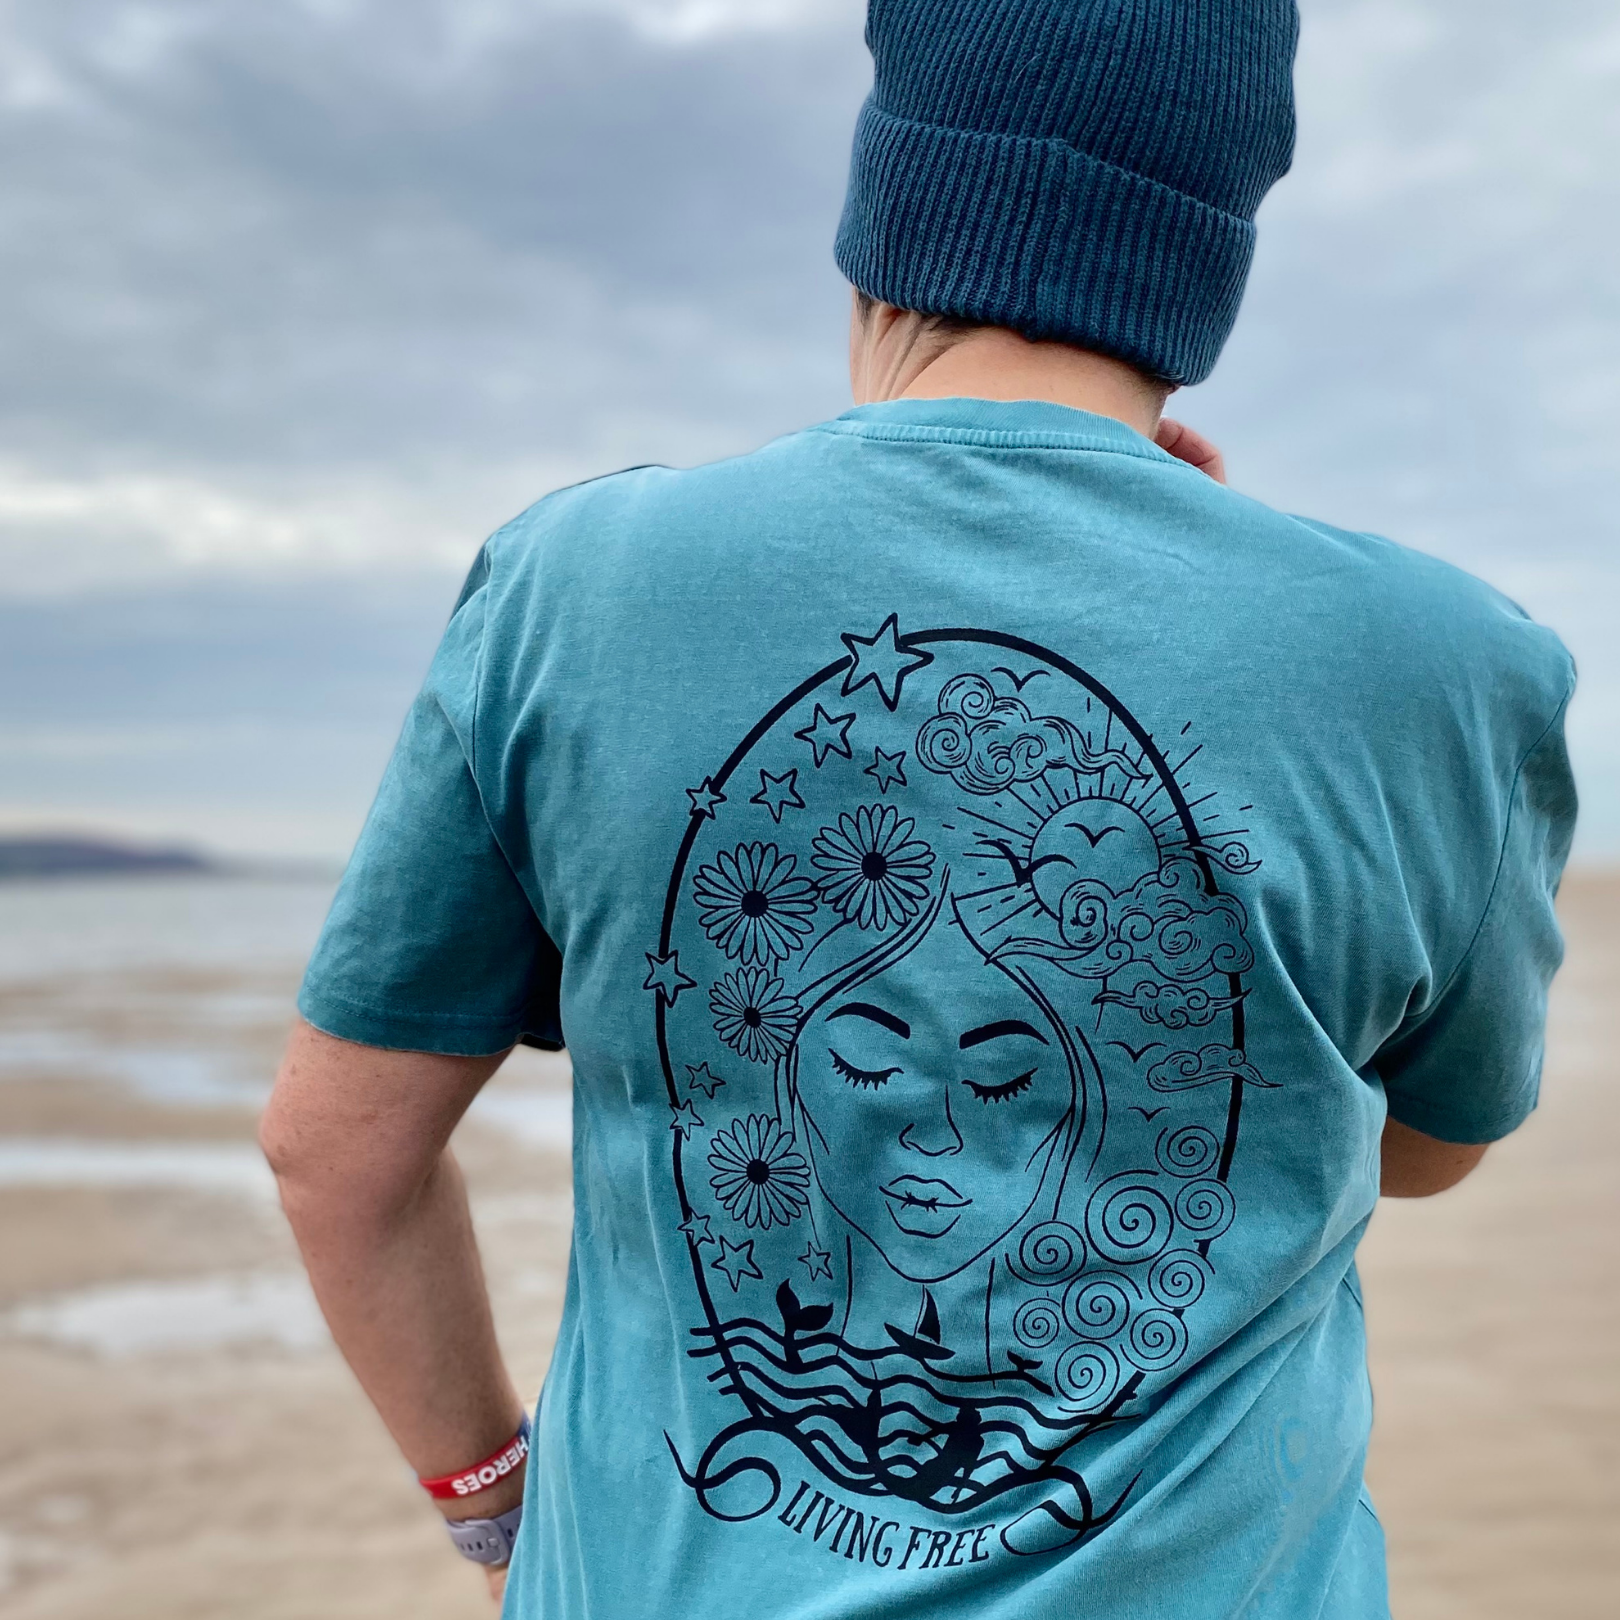 A woman's back, showing a seafoam green t-shirt with a print of a woman's face on it.